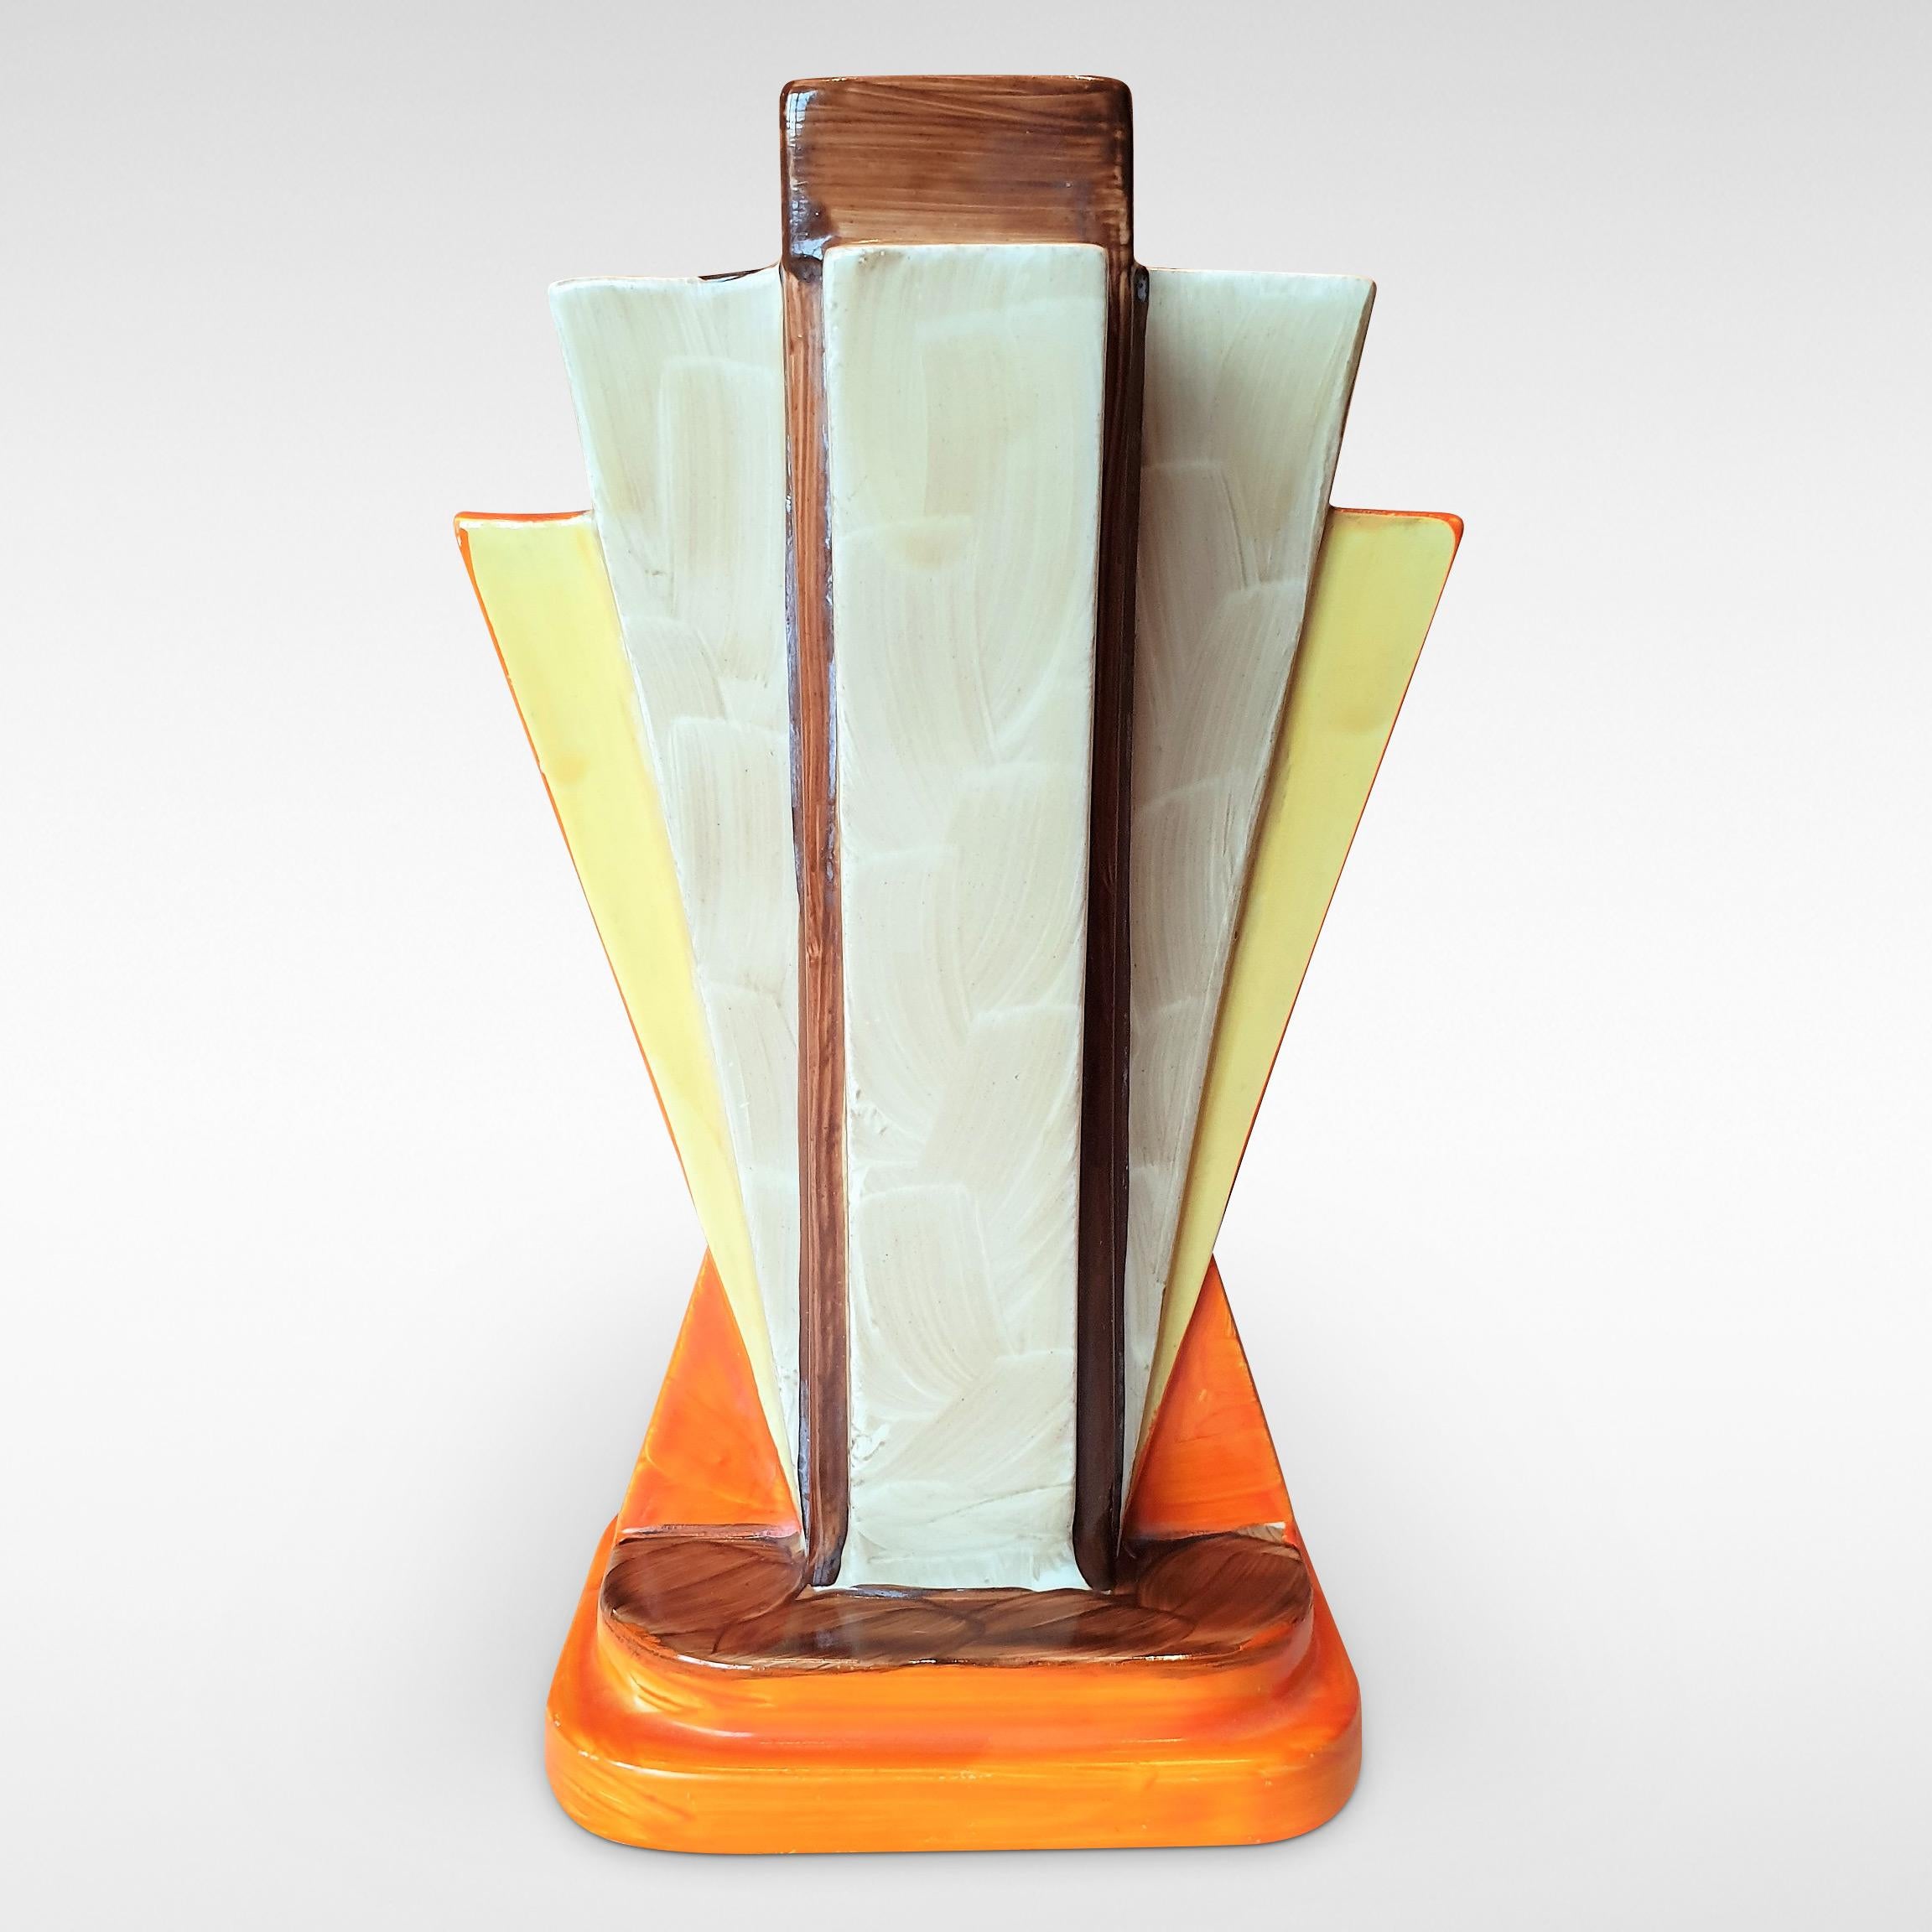 The Jazz age 'Odeon' style Art Deco 'Moderne' vase was launched by Myott Son & Co for Christmas 1933. It is sometimes known as the Pyramid Fan Vase.